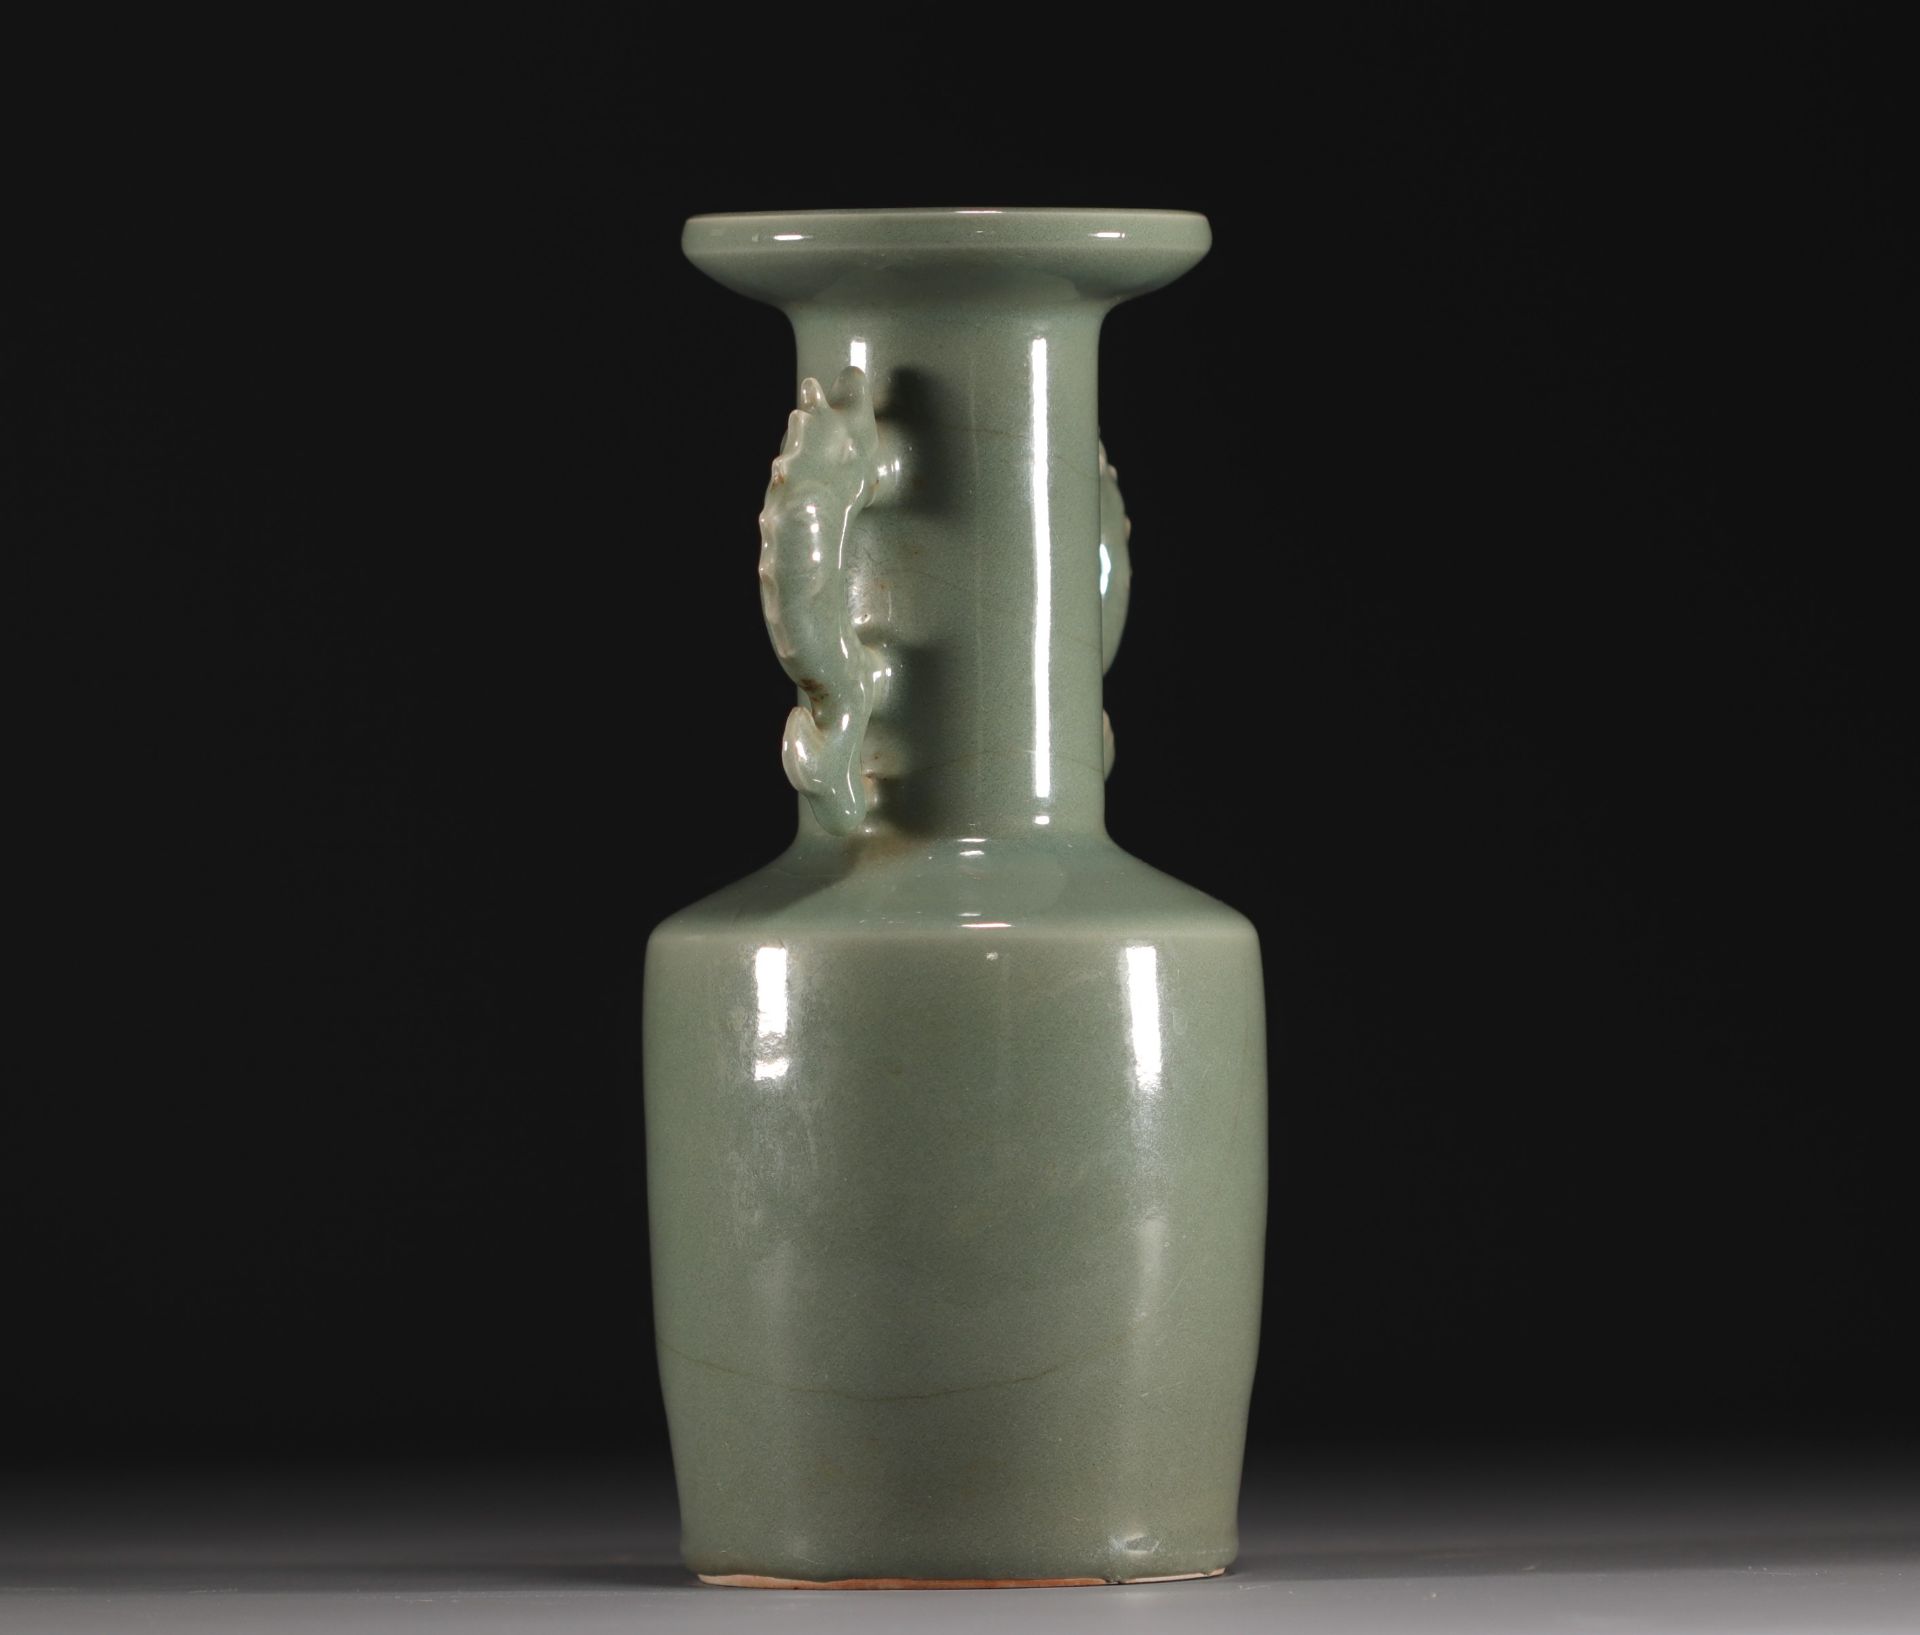 China - A green-glazed monochrome porcelain vase with fish-shaped handles, Qing period. - Image 2 of 5